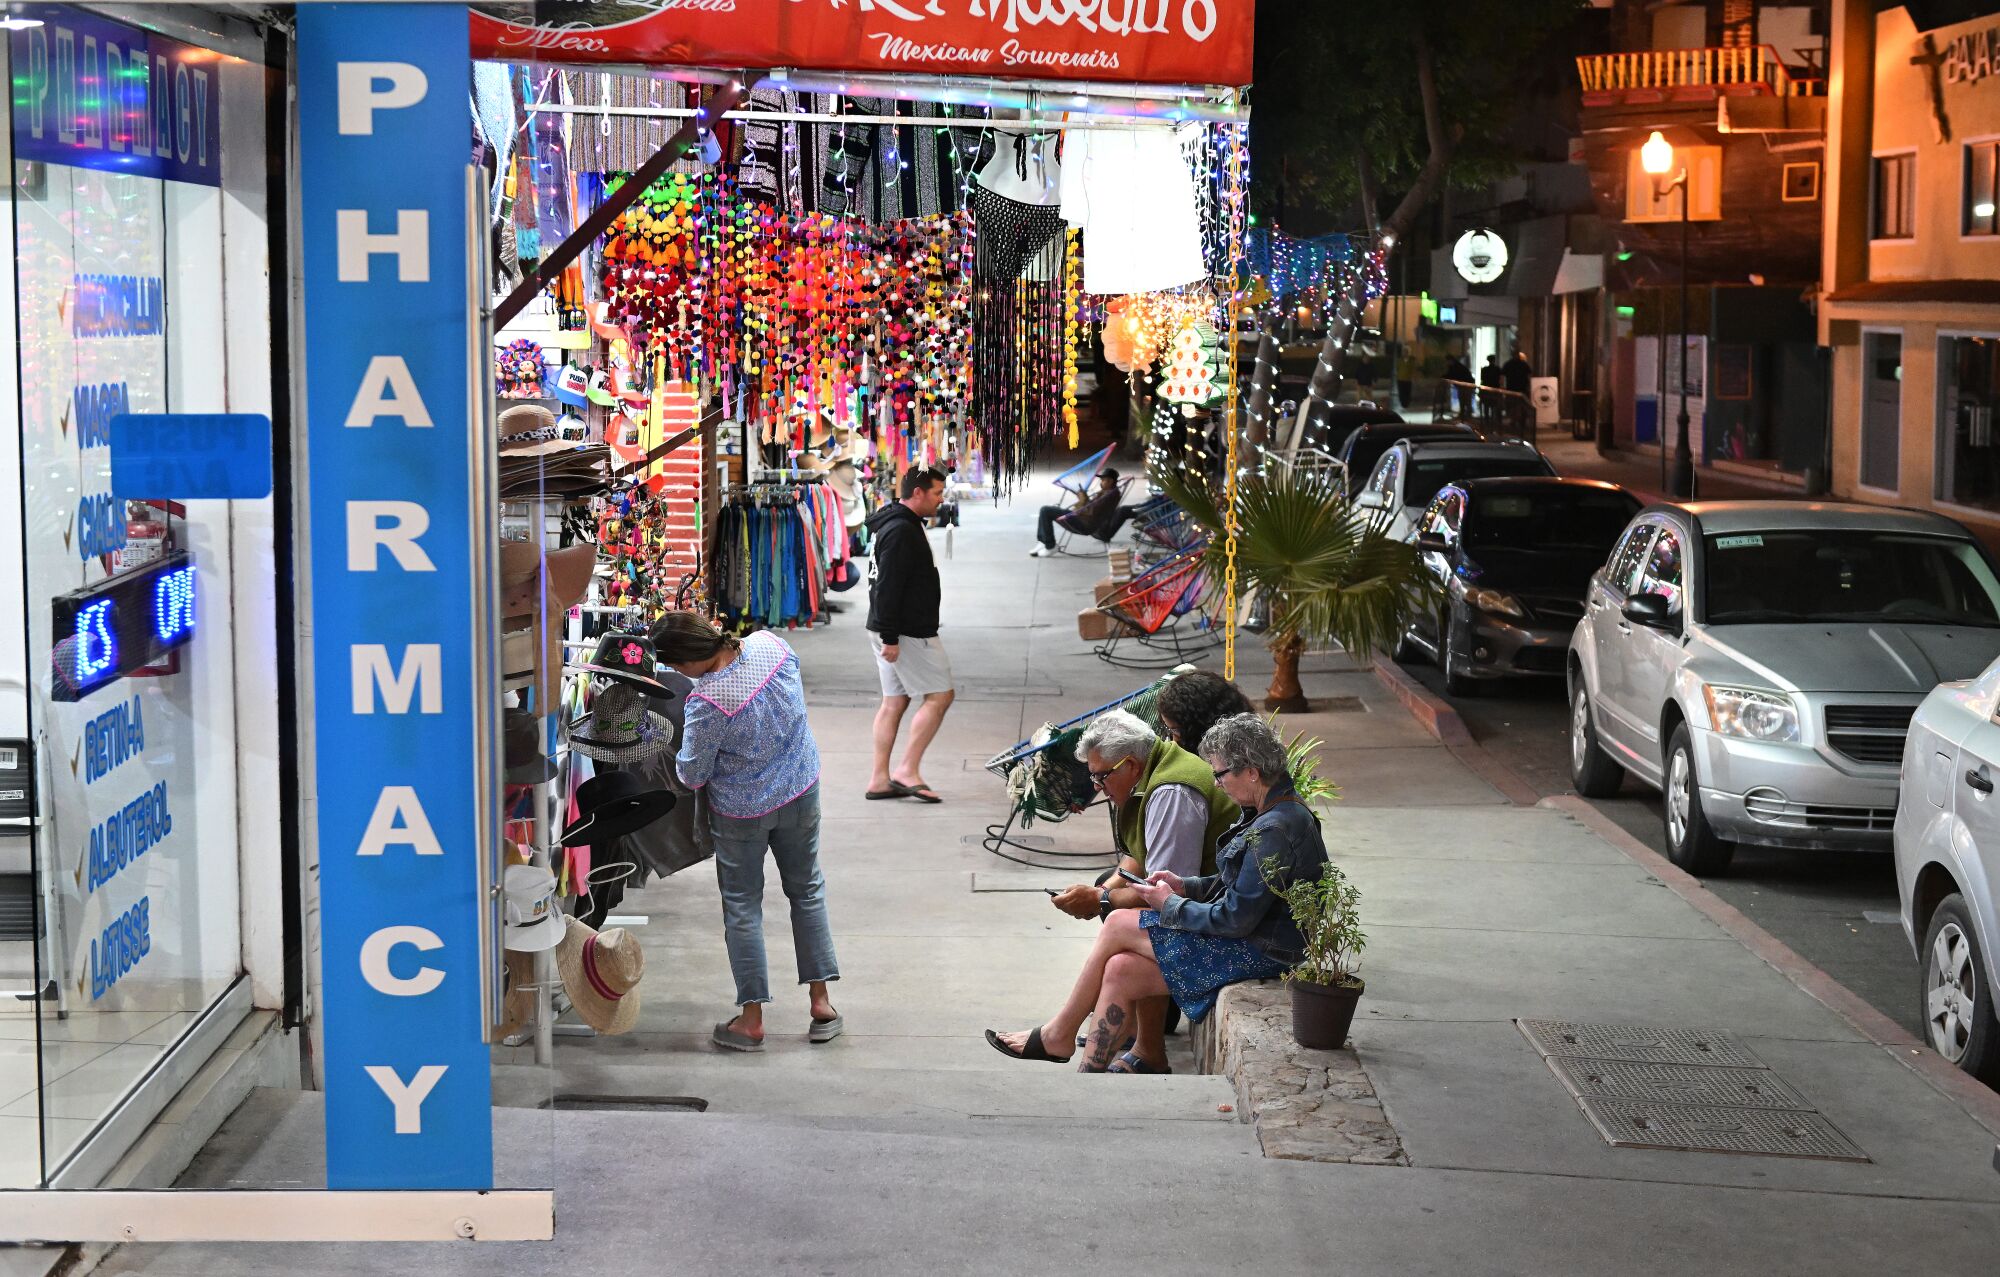 A street with shops. One has a vertical sign that says "Pharmacy."